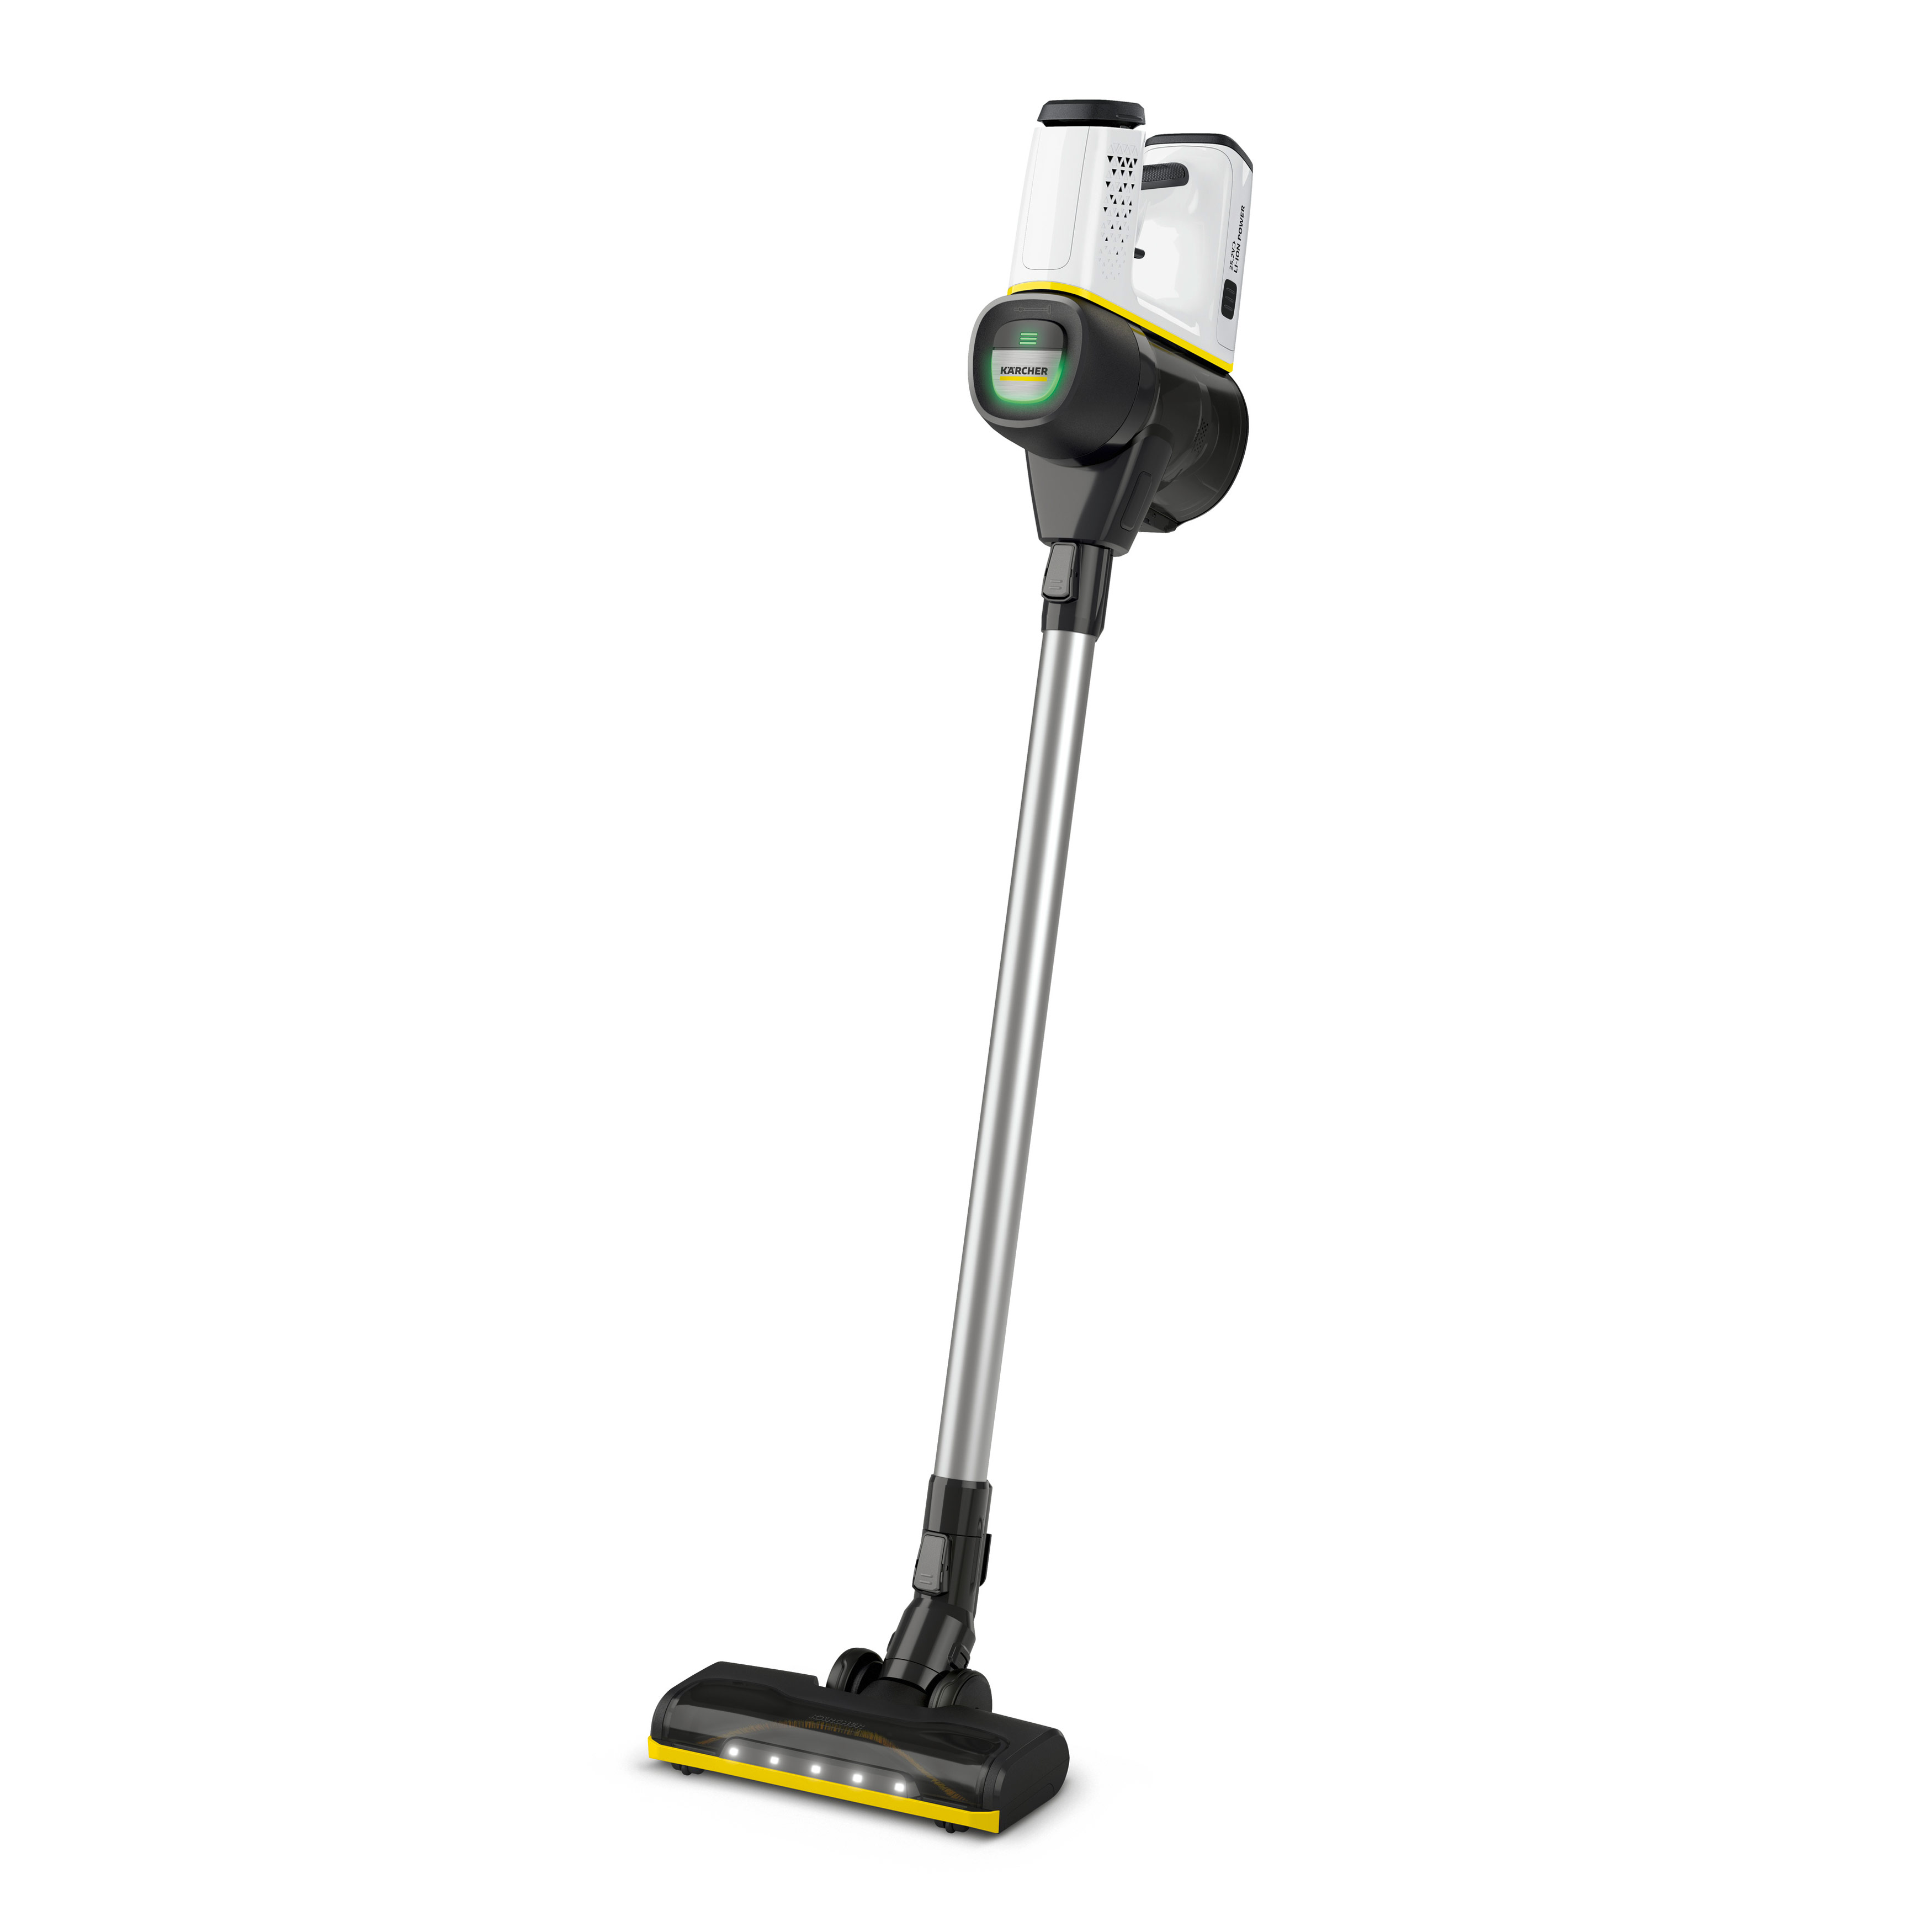 Пылесос Karcher VC 6 Cordless ourFamily Car (1.198-672.0) karcher пылесос беспроводной vc 6 cordless ourfamily car 1 198 672 0